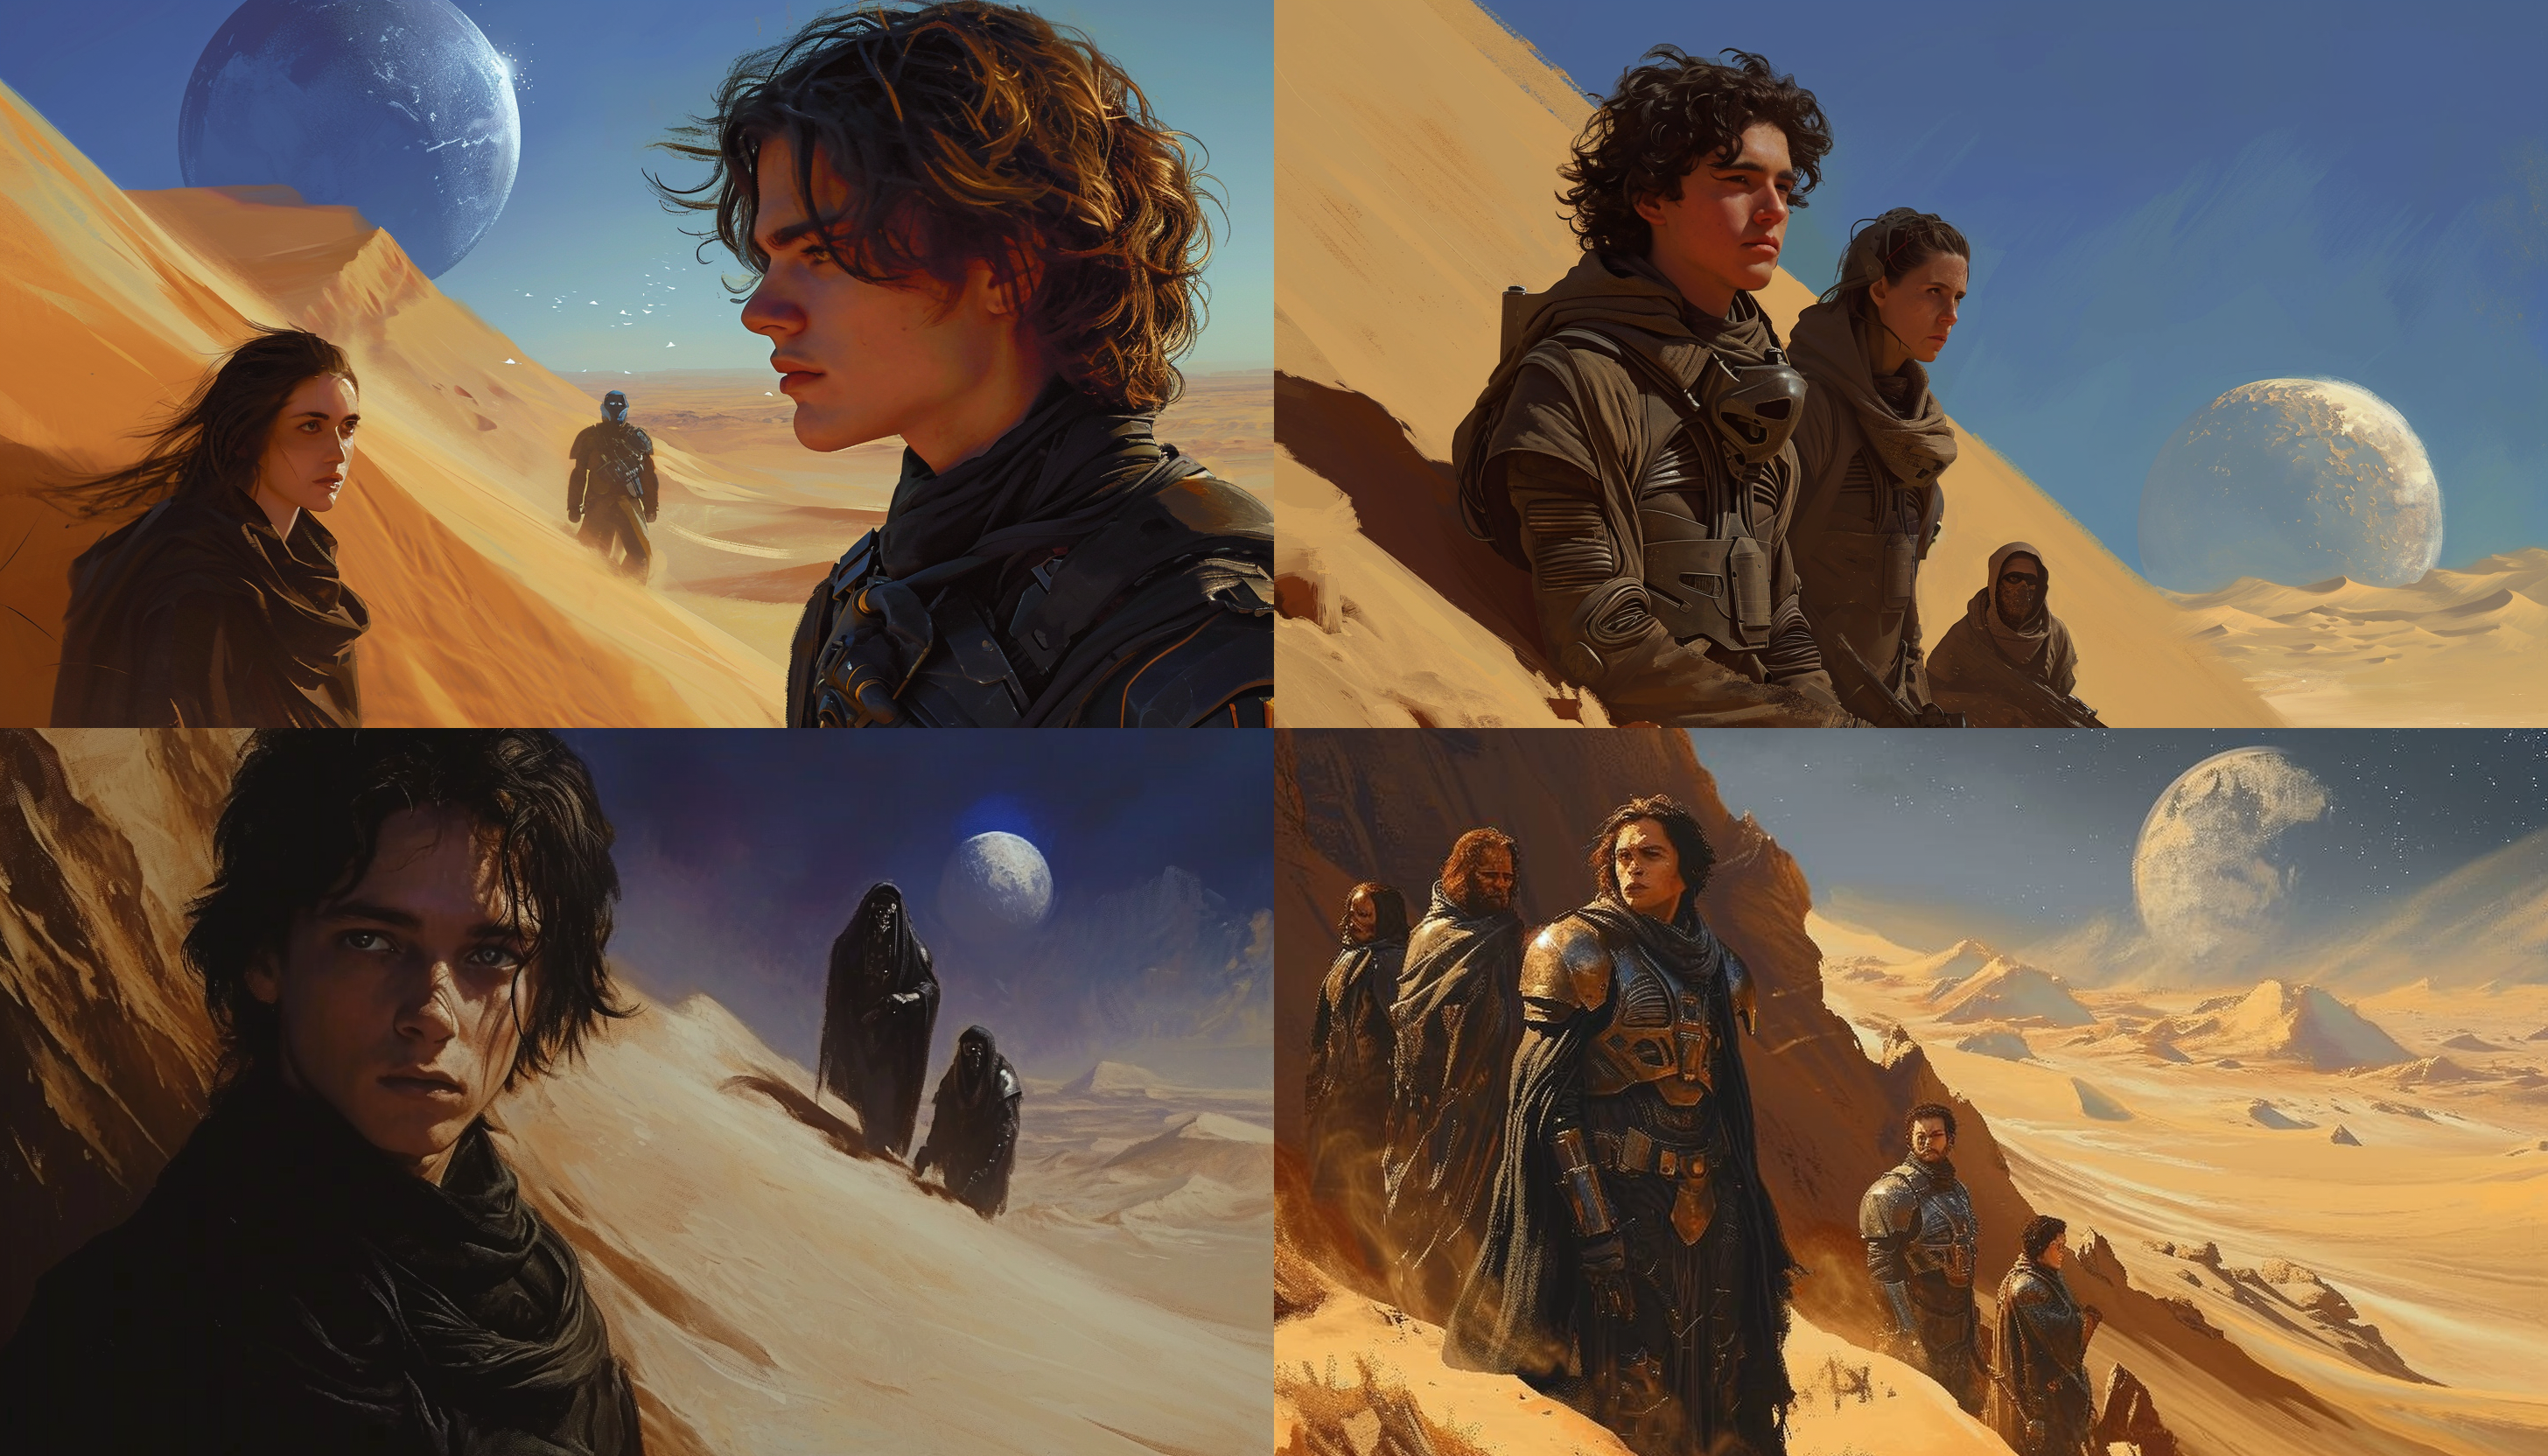 Paul and Jessica’s escape into the desert and their encounter with the Fremen